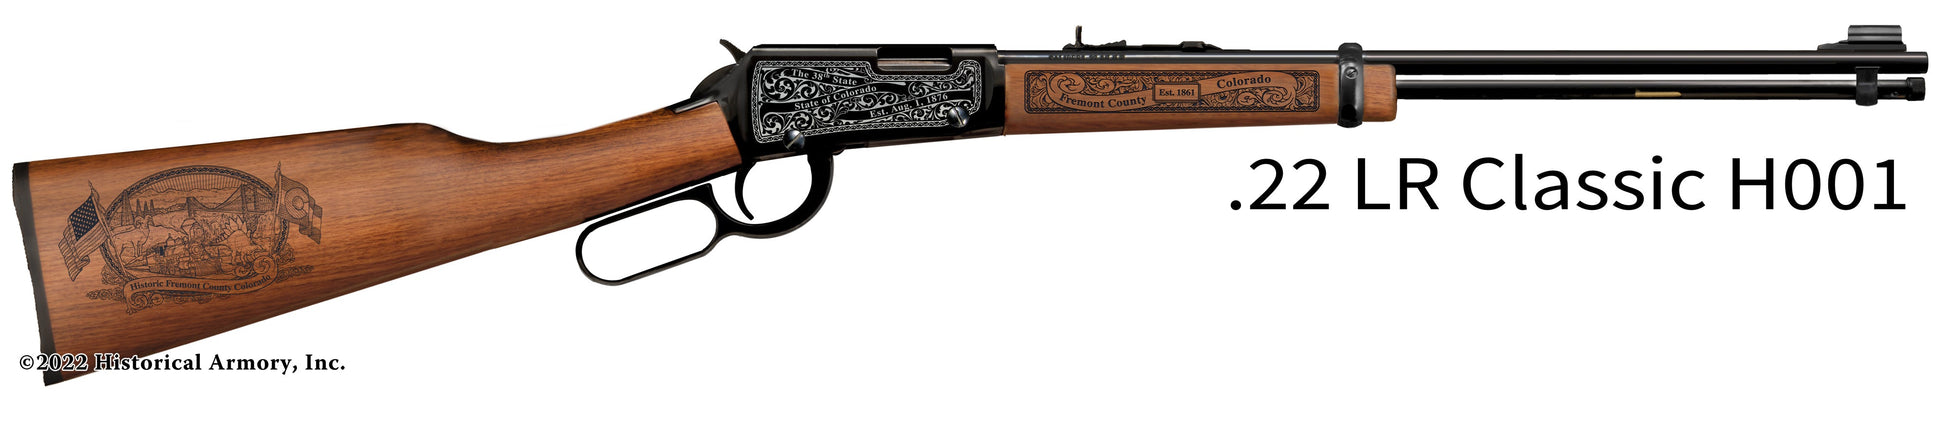 Fremont County Colorado Engraved Henry H001 Rifle